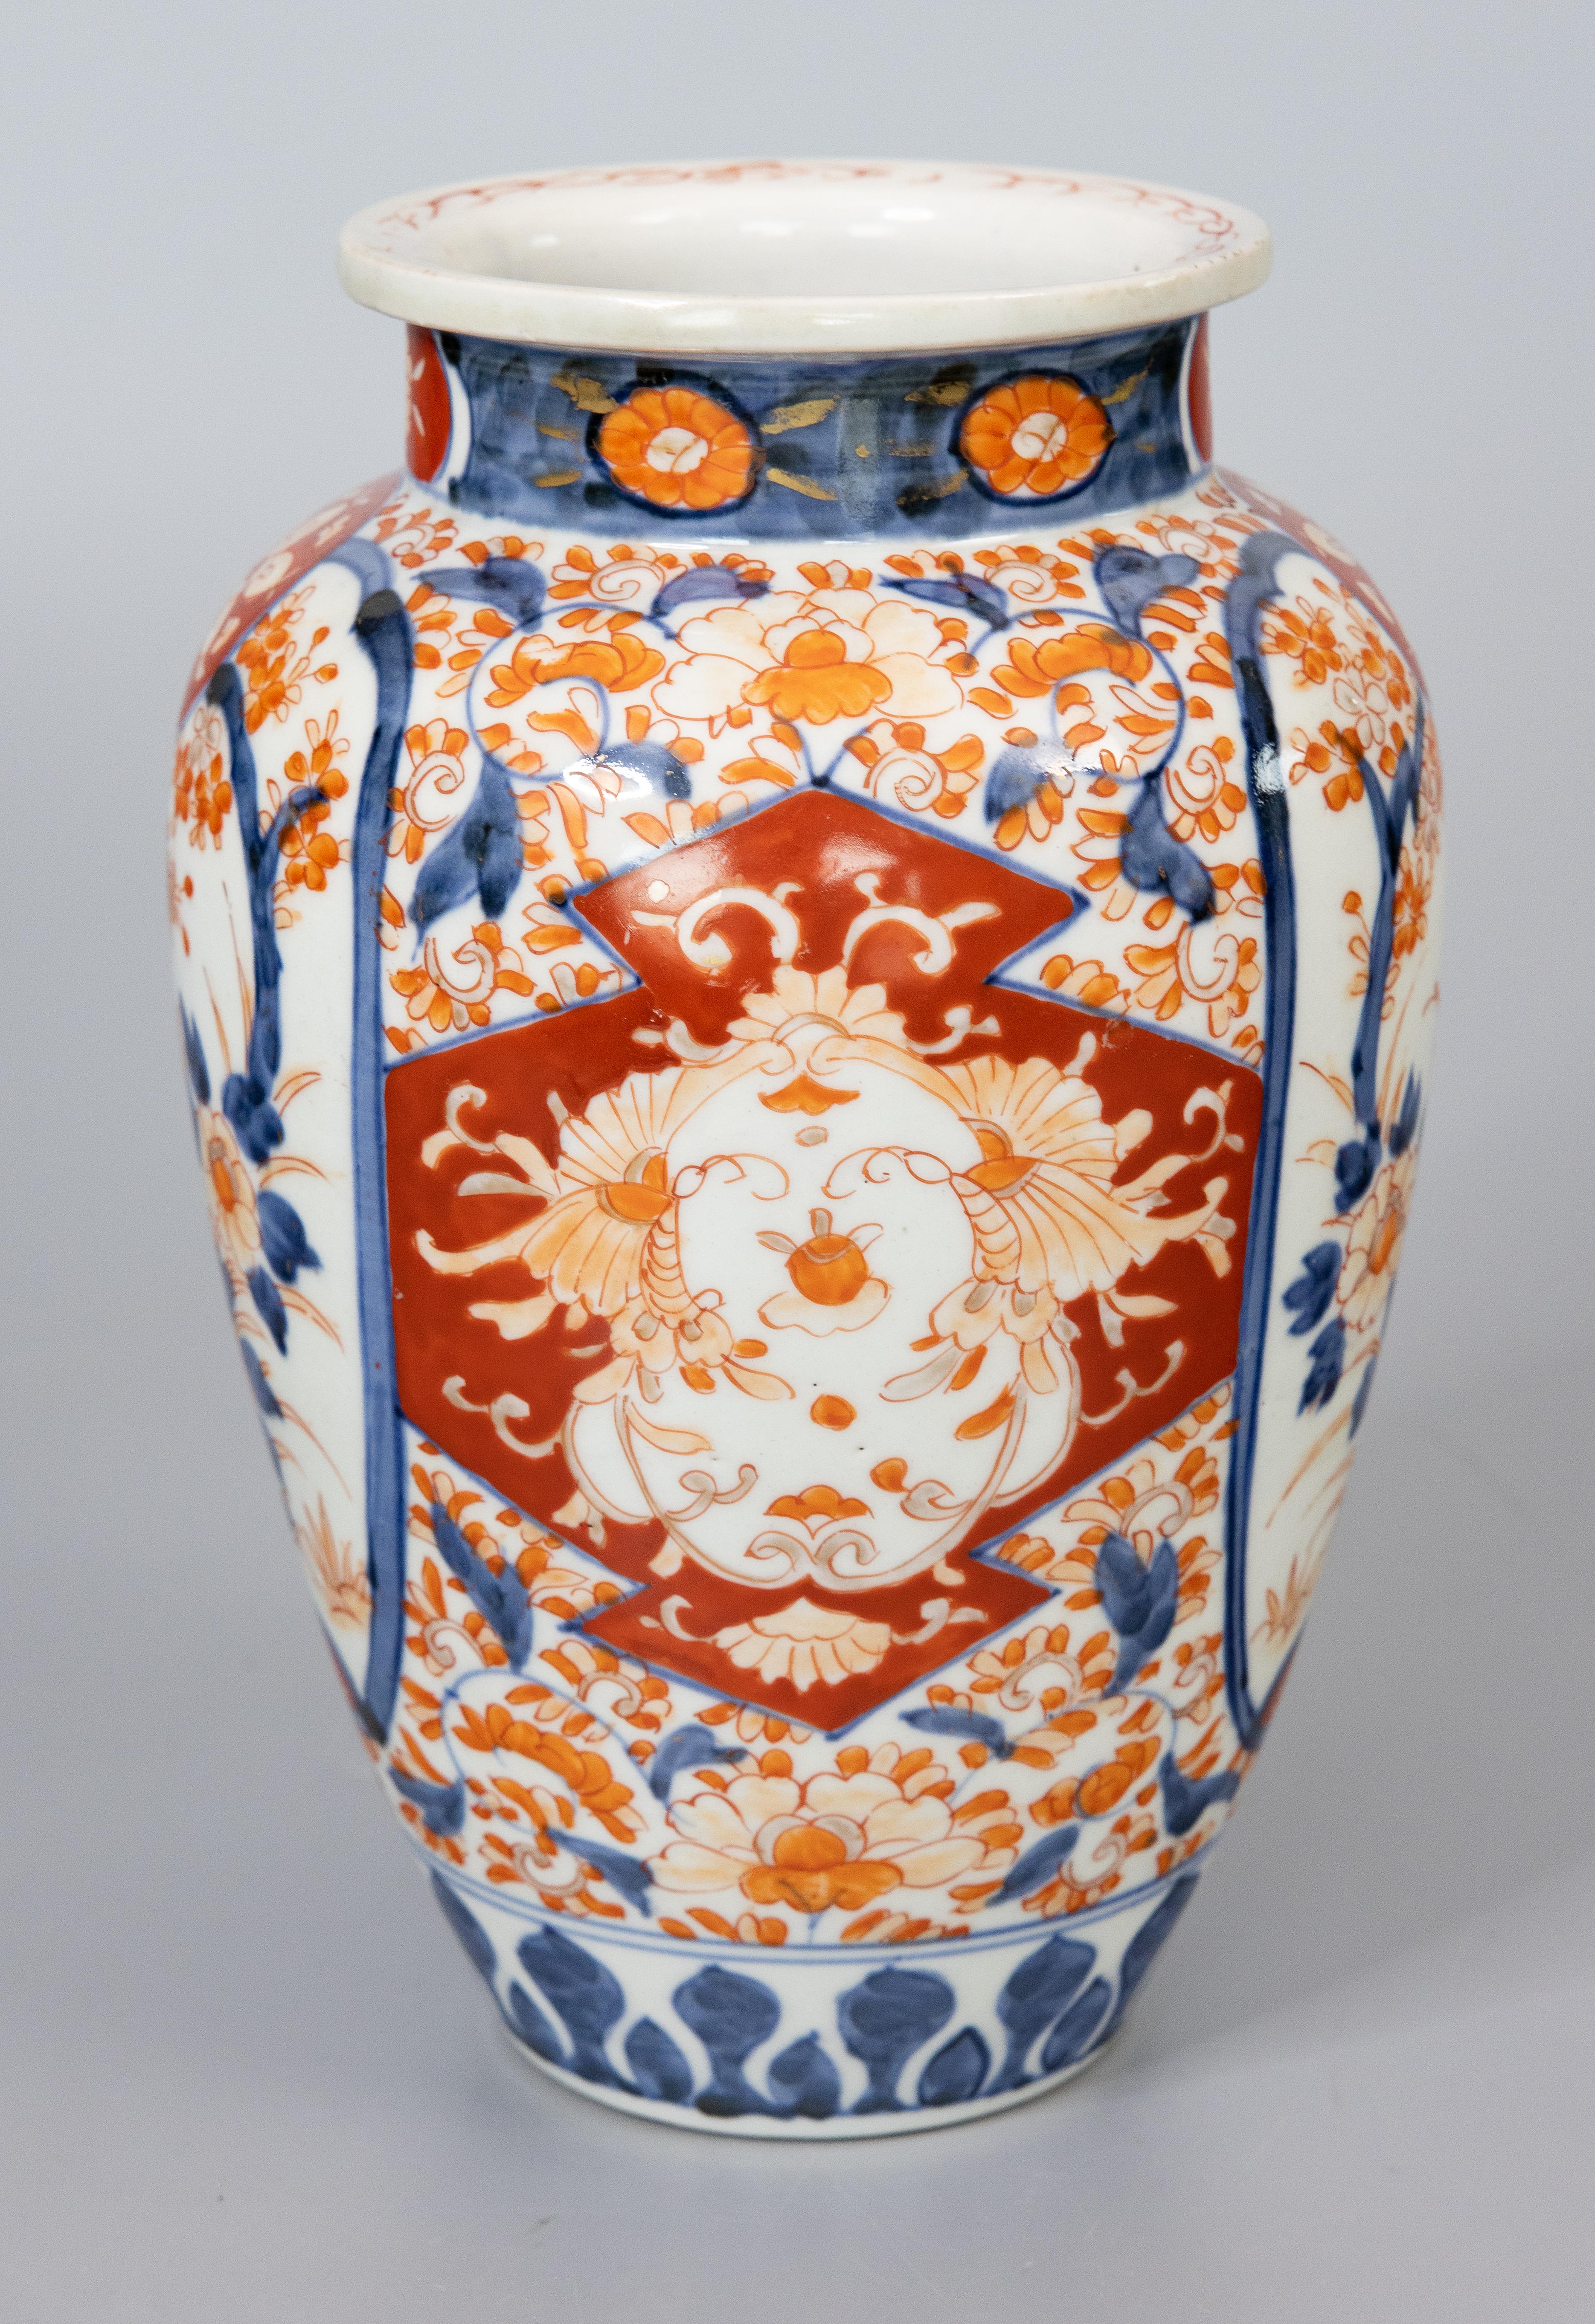 A gorgeous antique 19th-Century Japanese Imari porcelain vase. This fine vase is a nice large size and has a lovely shape and hand painted floral design in the traditional Imari colors. It's in beautiful antique condition and would be fabulous for